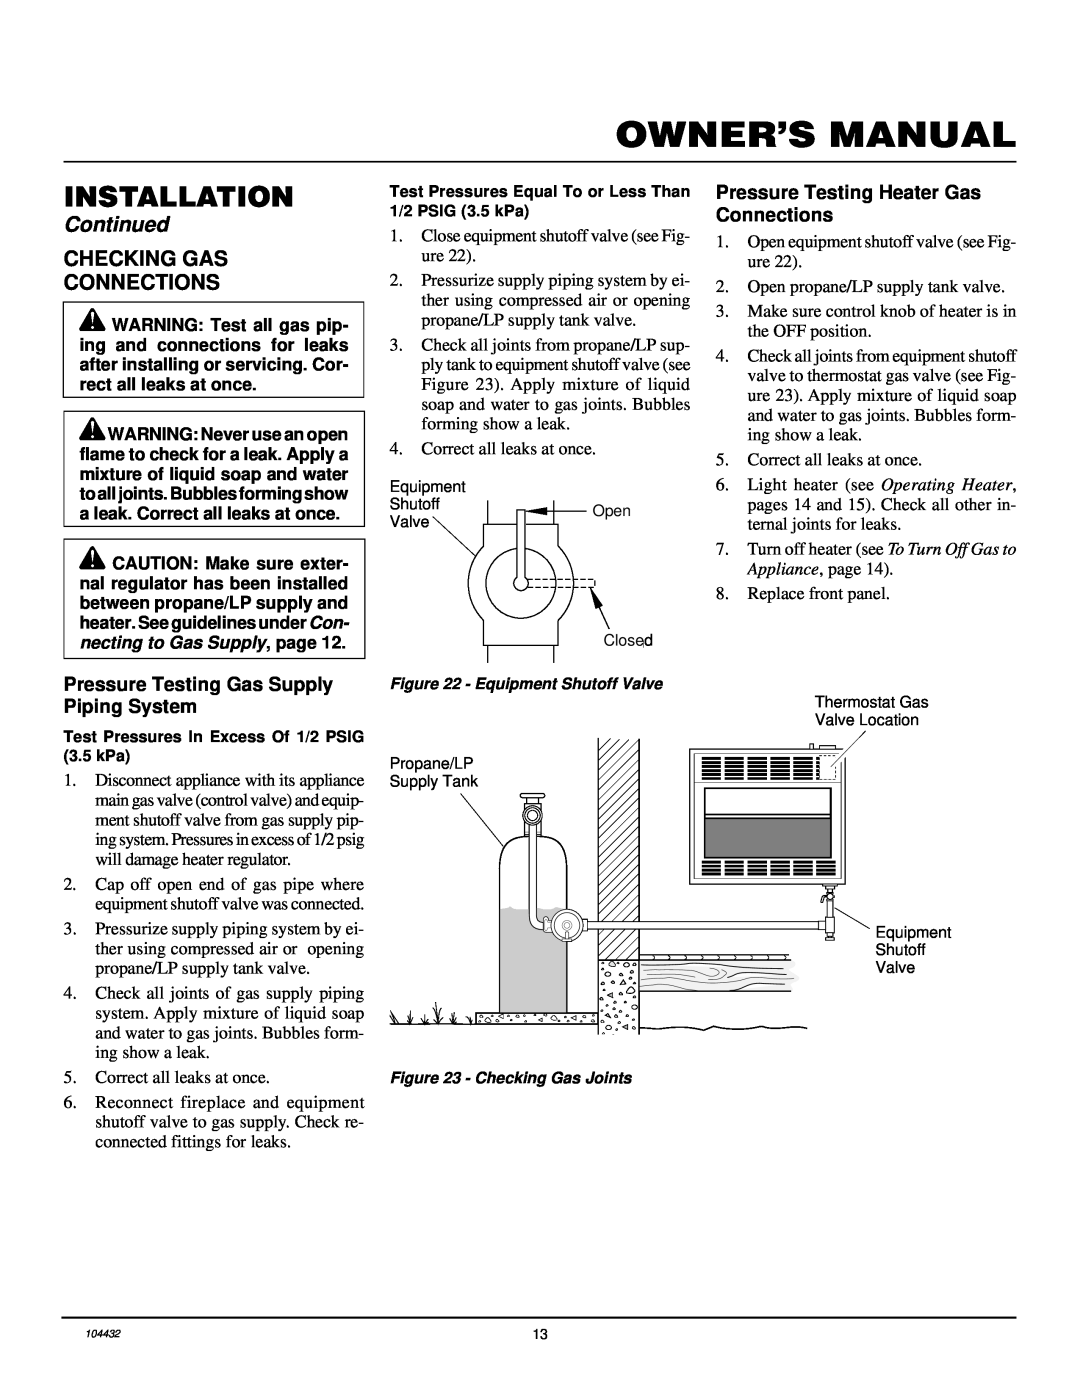 Vanguard Heating VMH3000TP Owner’S Manual, Installation, Continued, Pressure Testing Gas Supply Piping System 